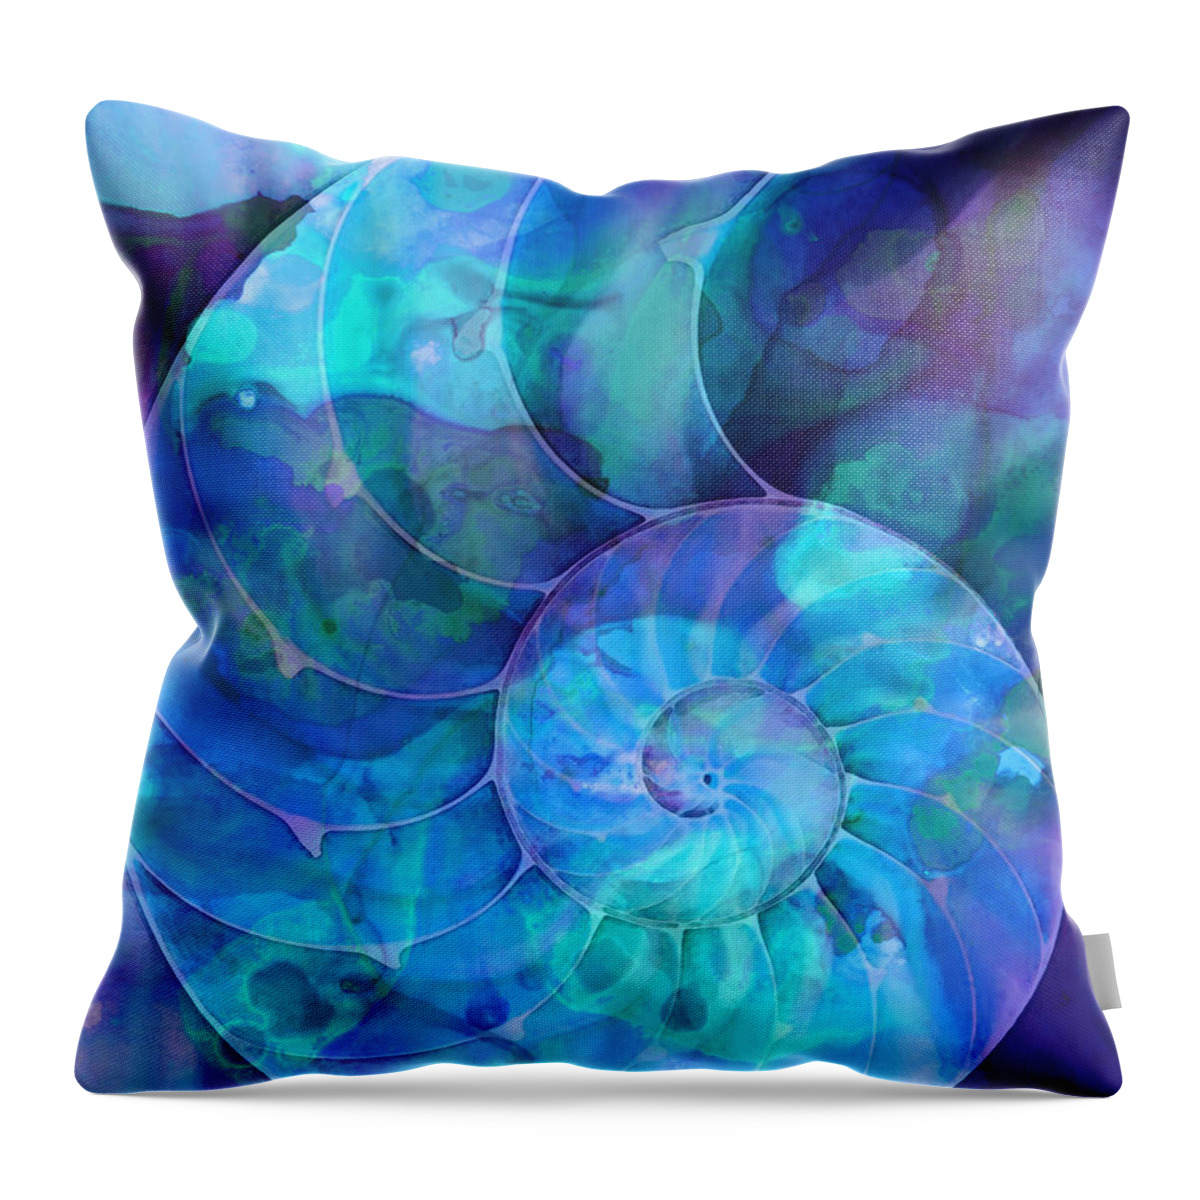 Blue Throw Pillow featuring the painting Blue Nautilus Shell By Sharon Cummings by Sharon Cummings